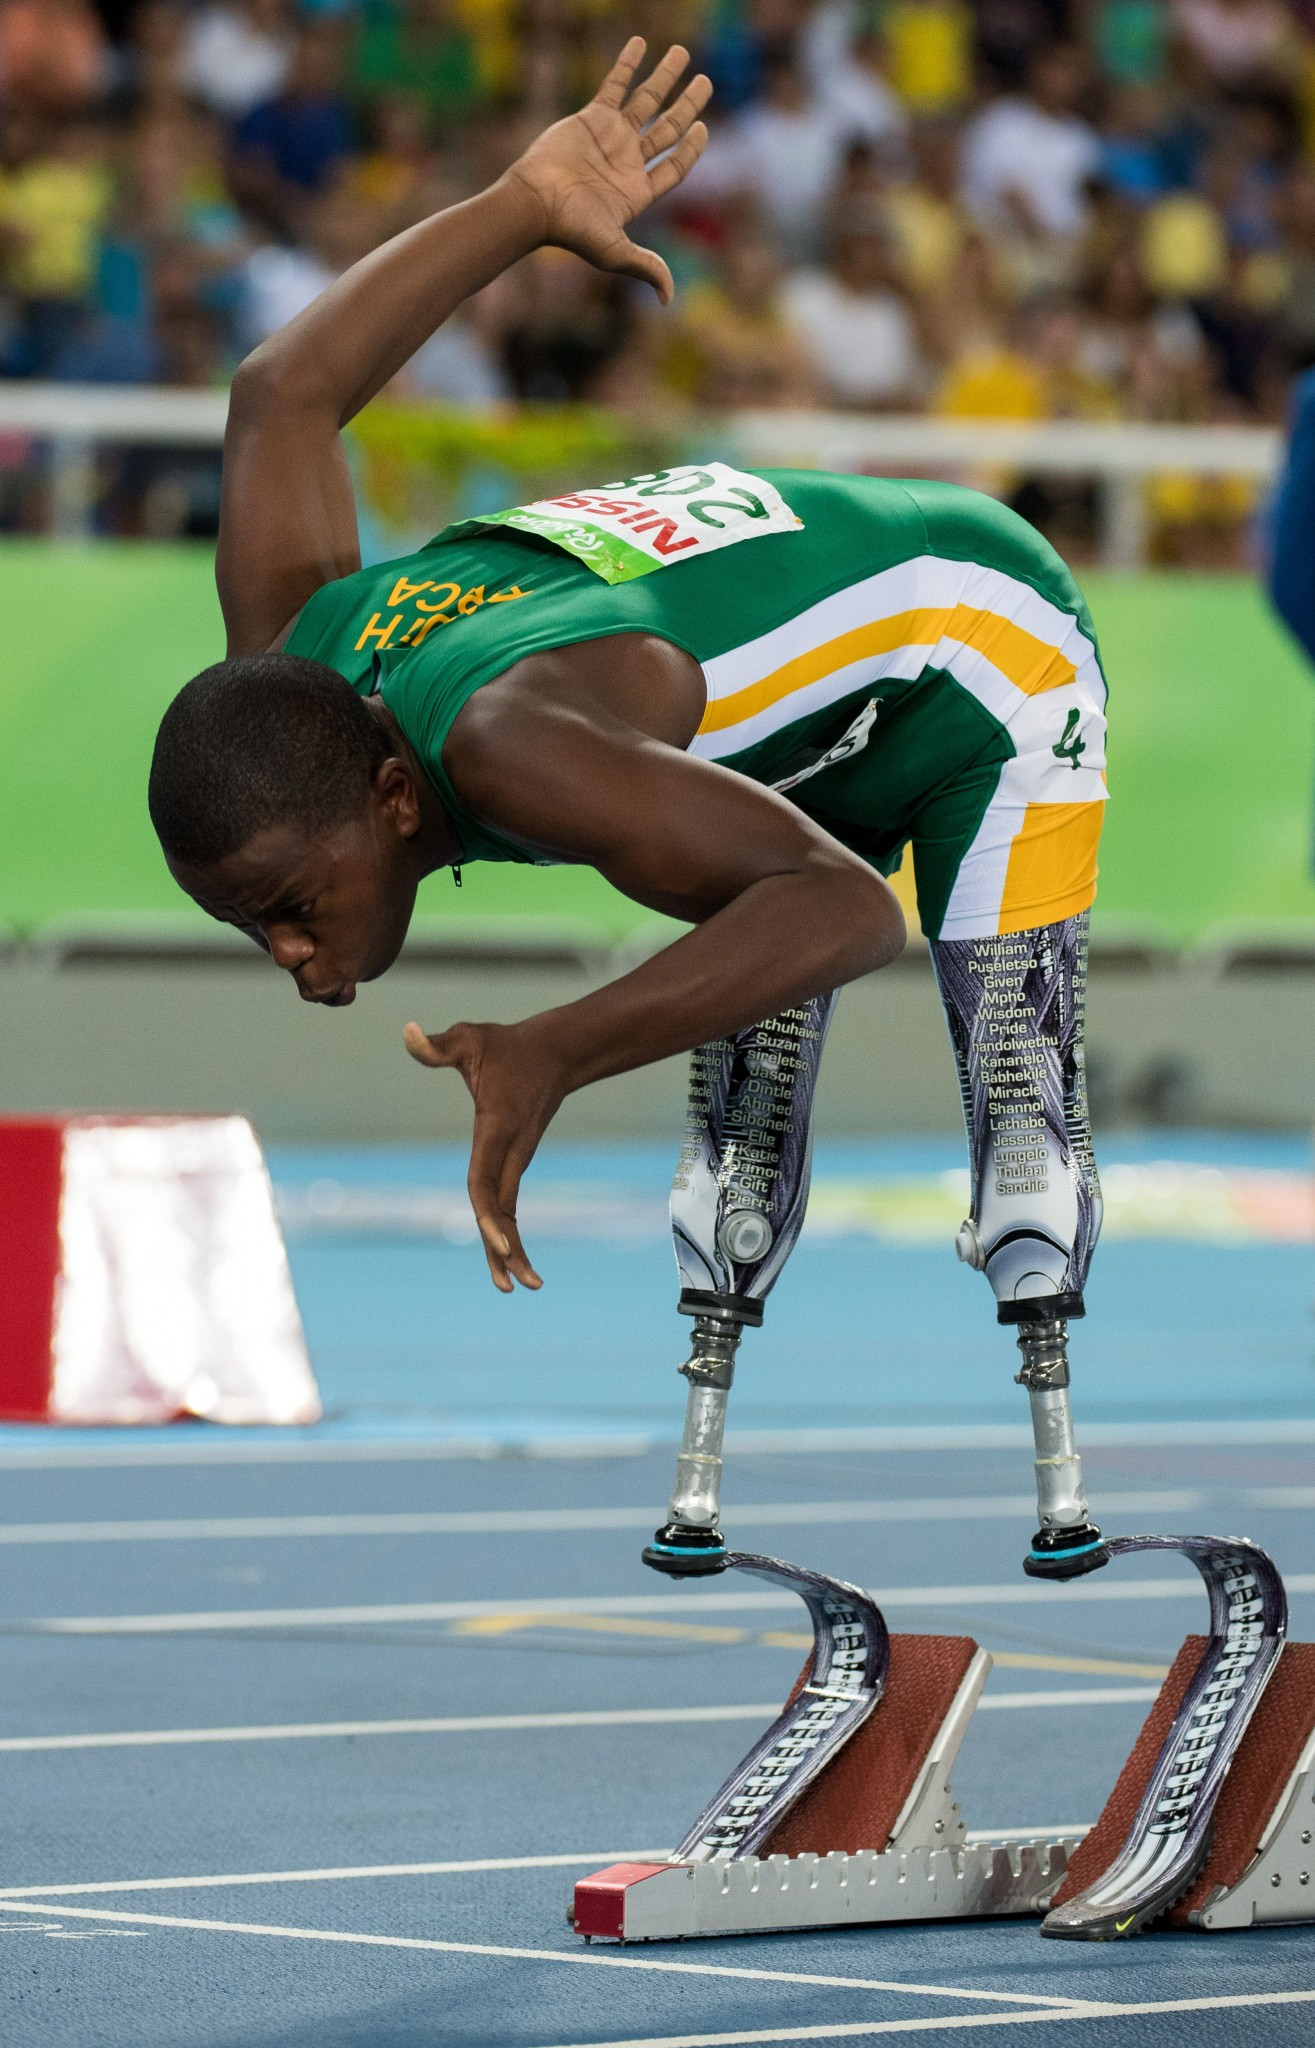 Rio 2016 Paralympic silver medallist Ntando Mahlangu is among the leading athletes set to compete at the inaugural World Para Athletics Junior Championships in Nottwil ©Getty Images